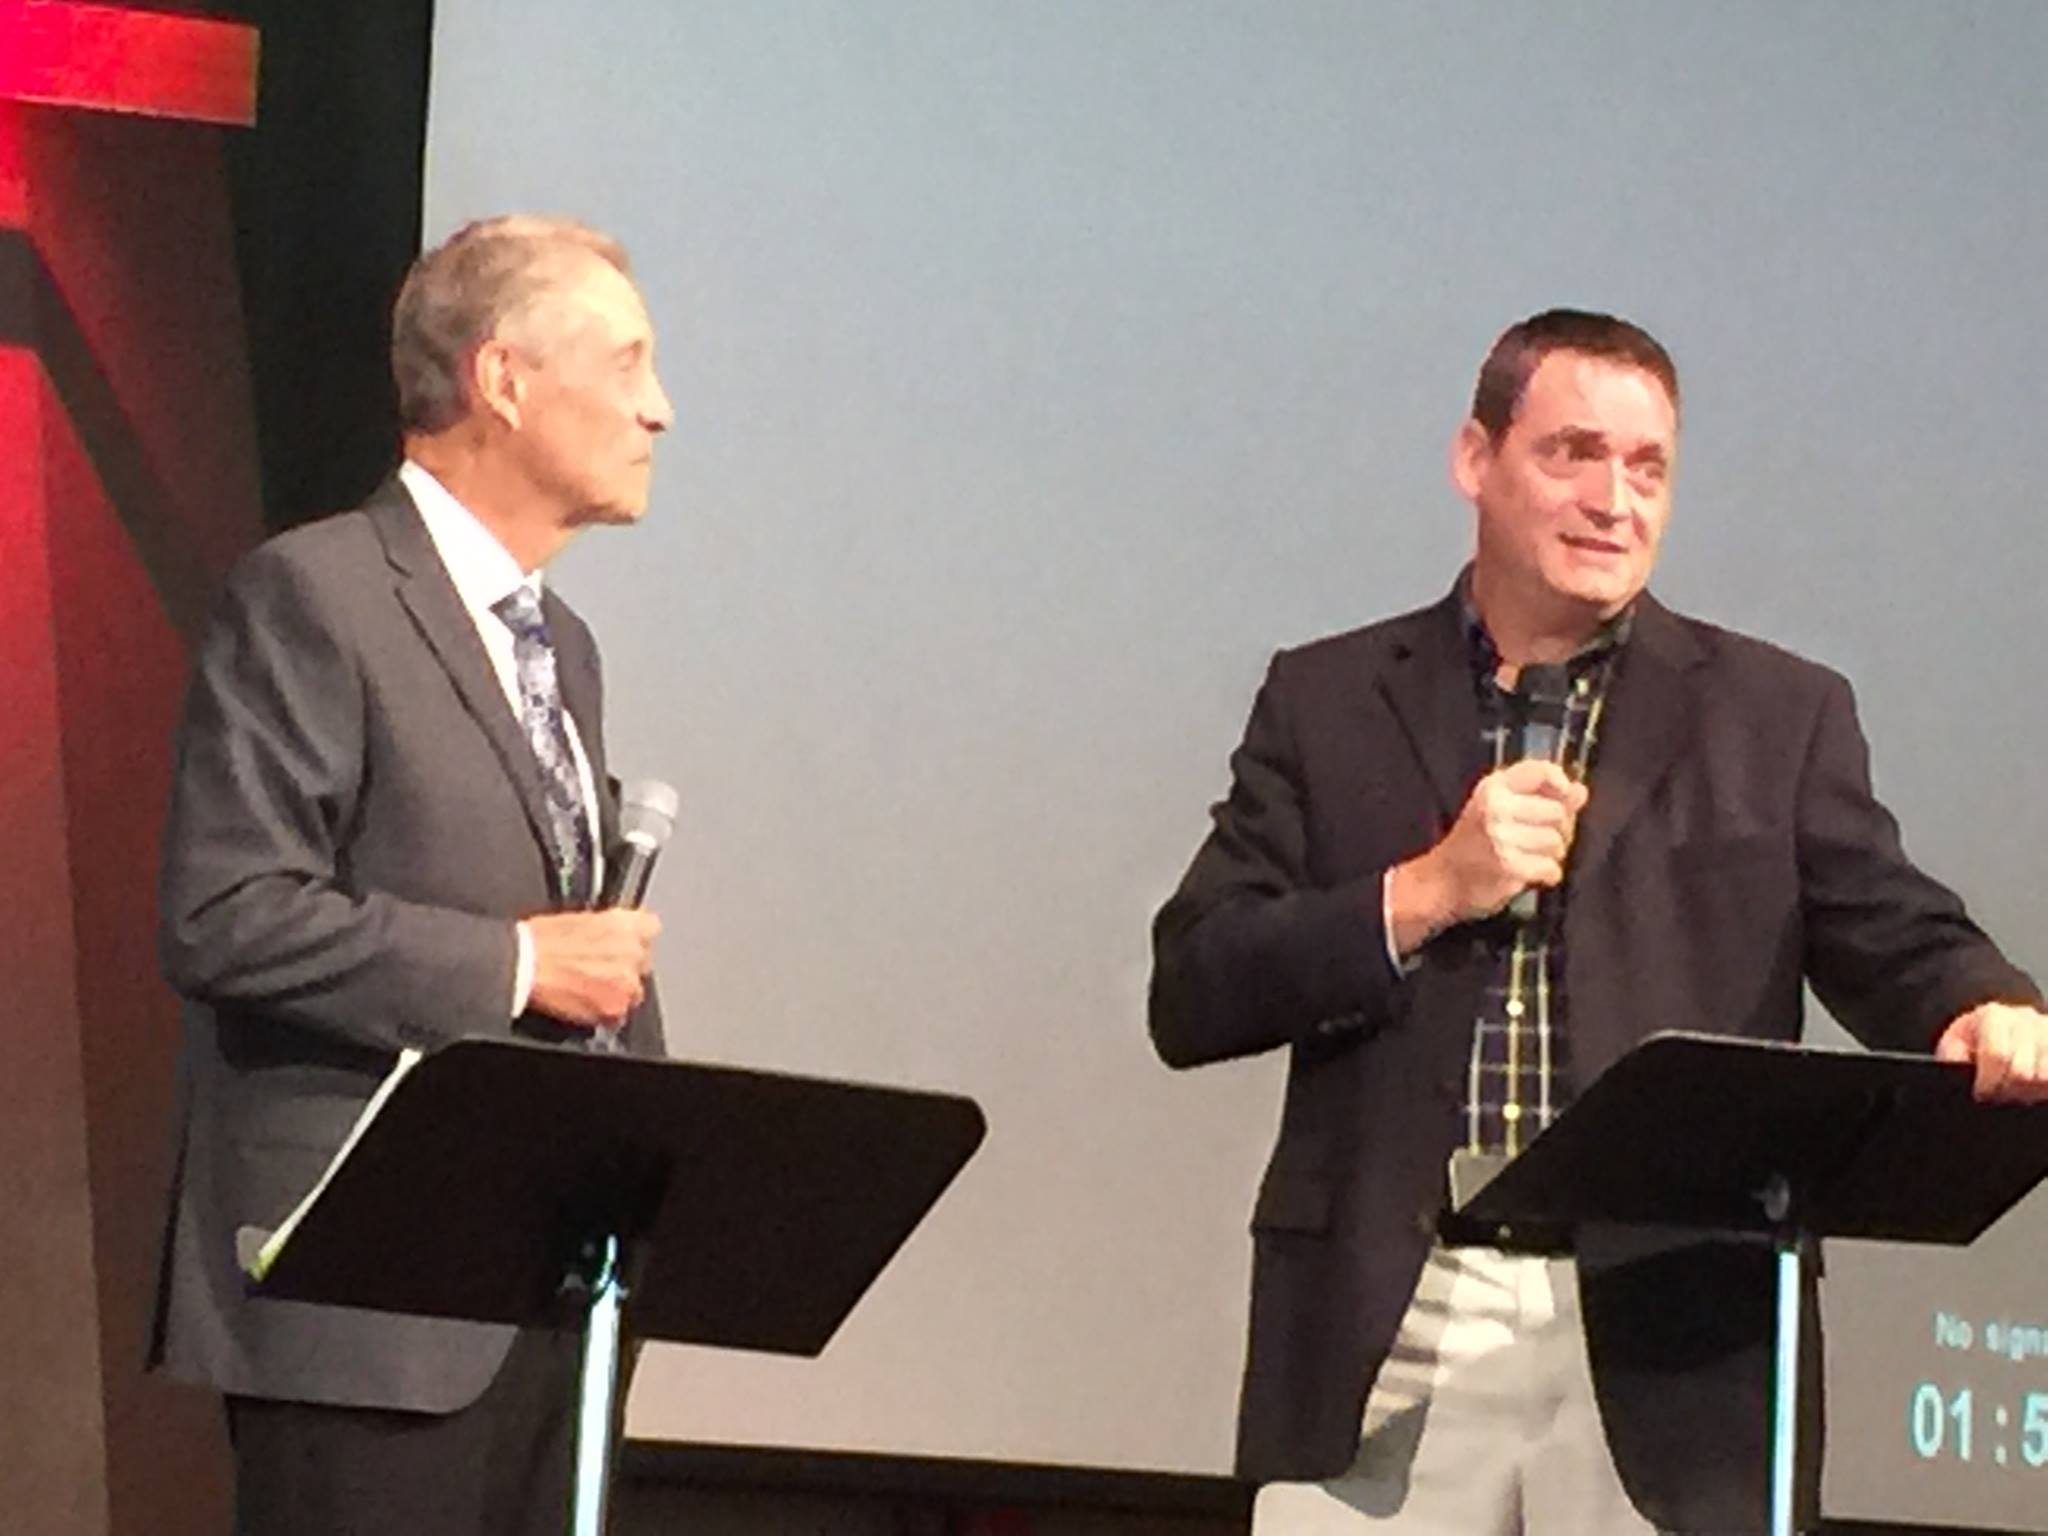 Father's Day "Tag-Team" preaching with my sone Ron at Braeside Camp in Paris, Ontario. 